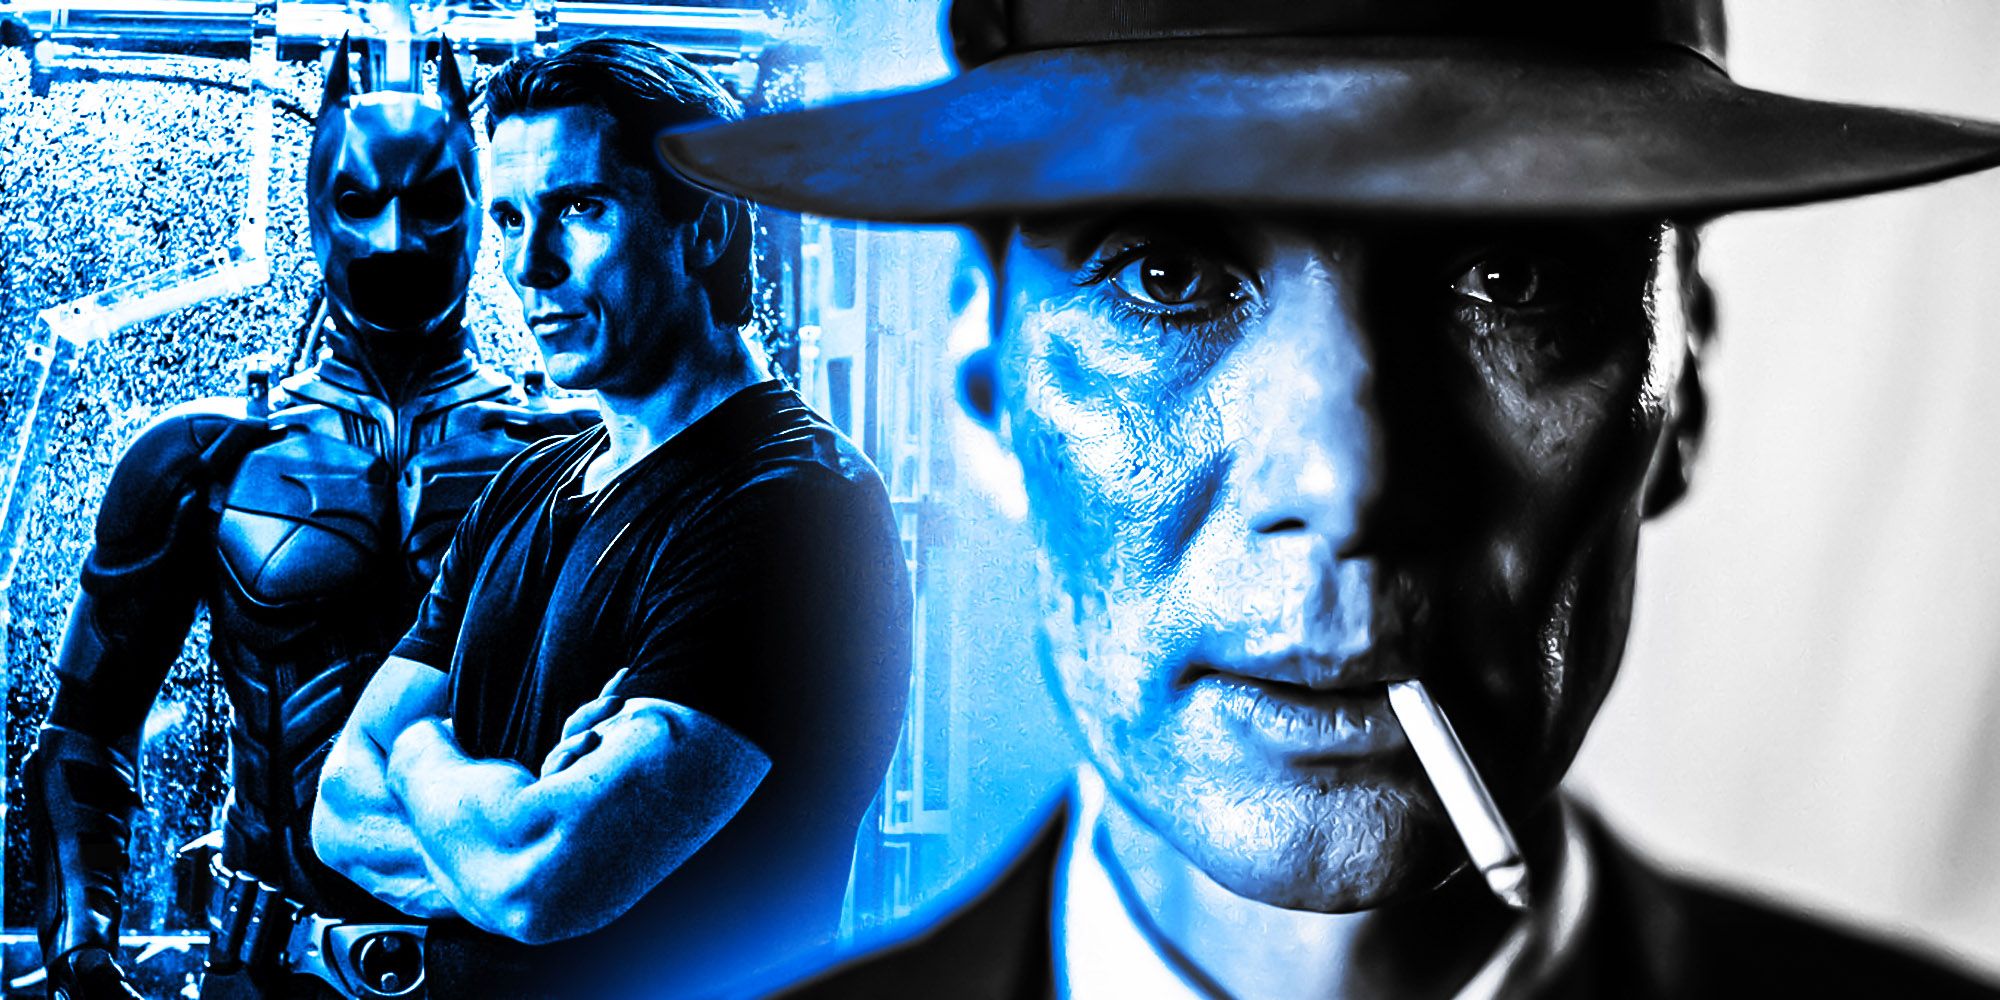 Custom image of Cillian Murphy as Oppenheimer and Christian Bale as Batman from the dark knight